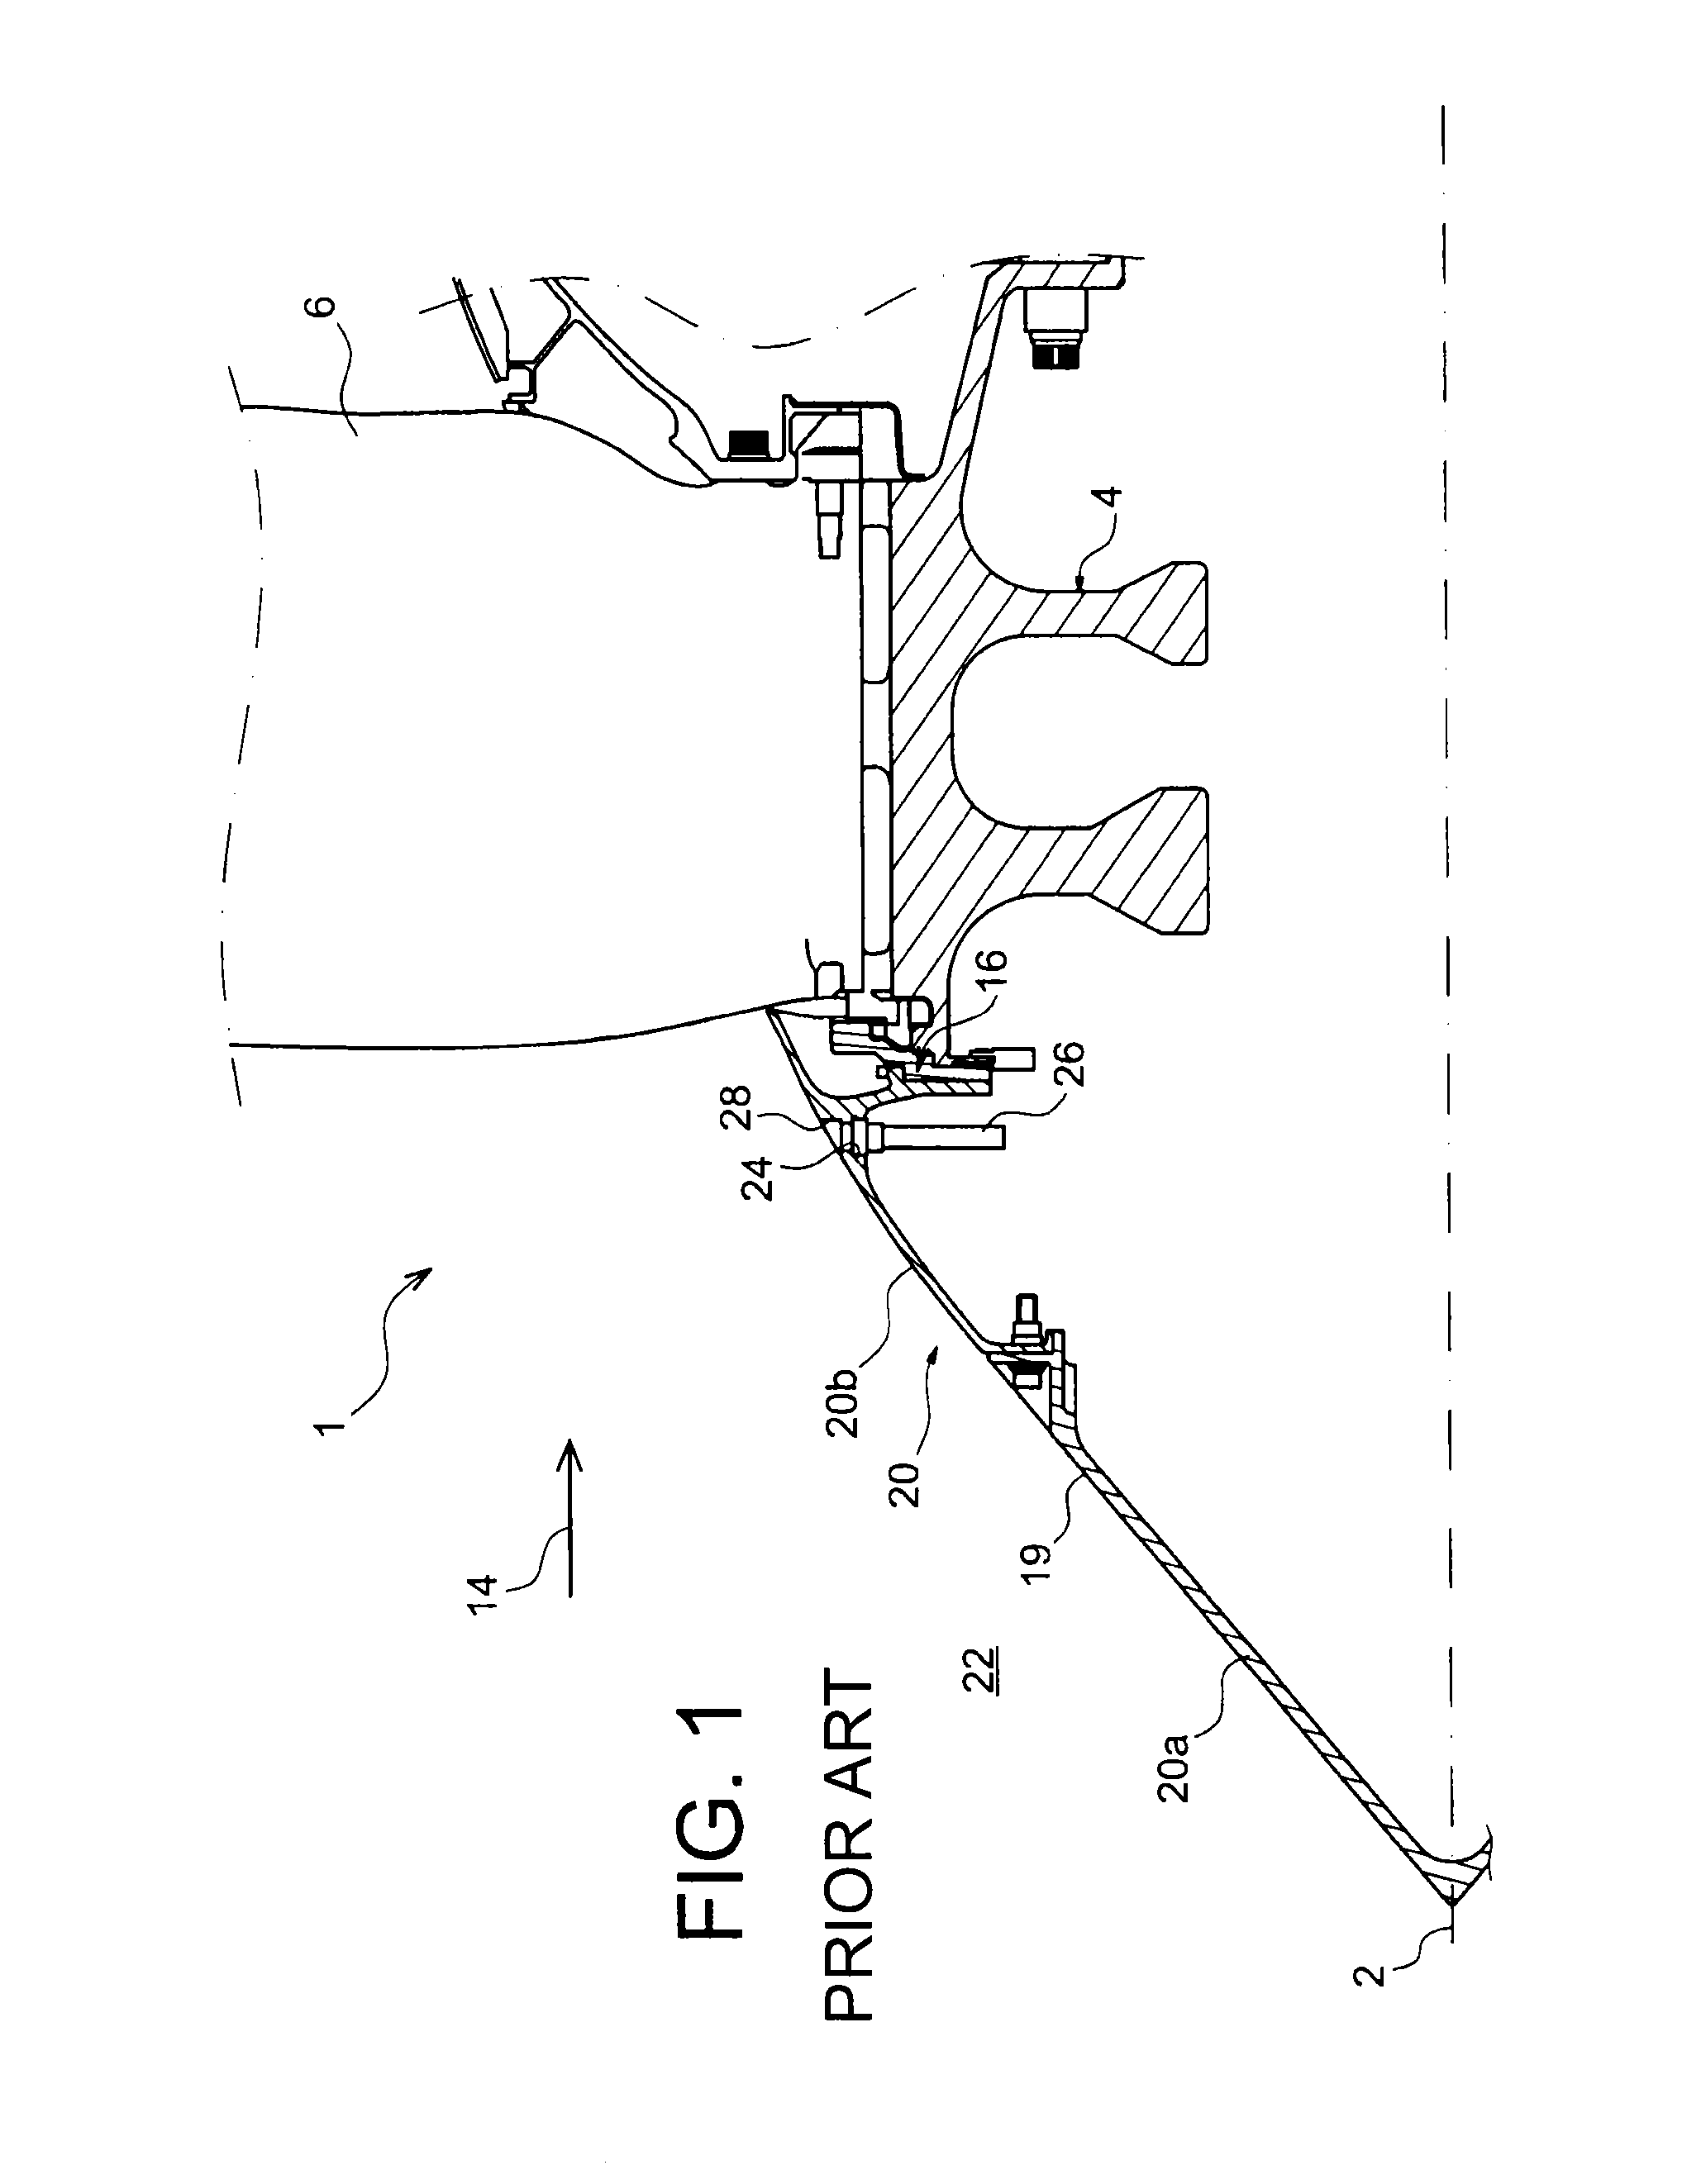 Turbine engine fan comprising a balancing system with blind holes for accommodating masses